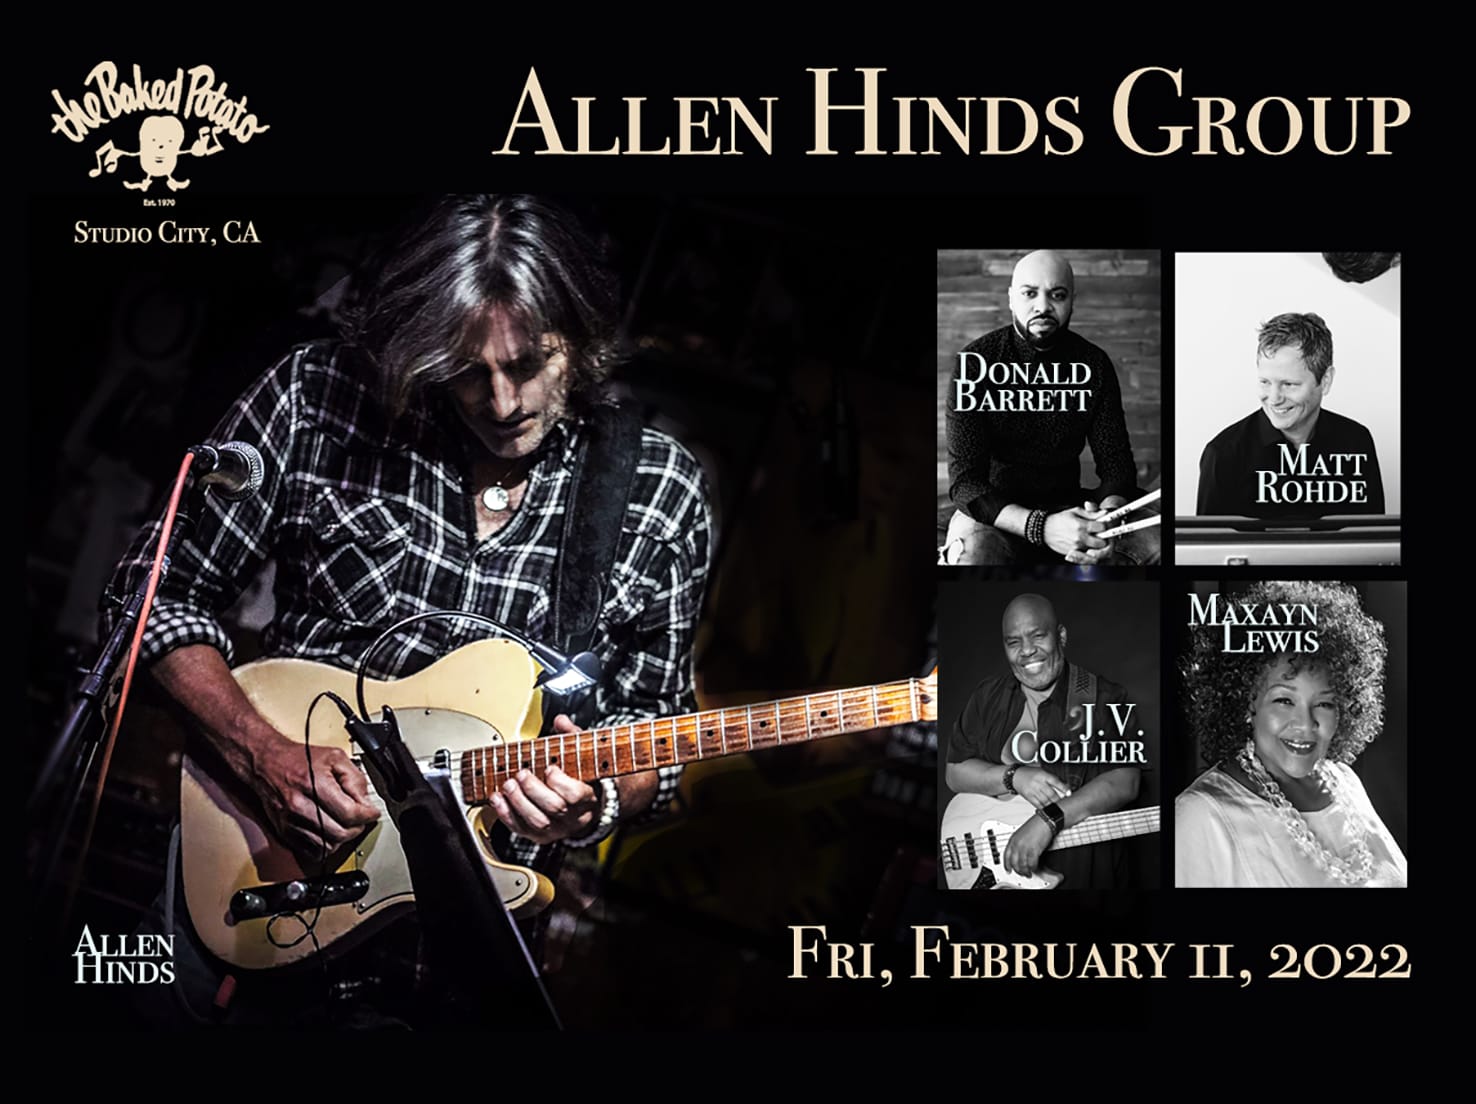 ALLEN HINDS GROUP - Friday, February 11, 2022